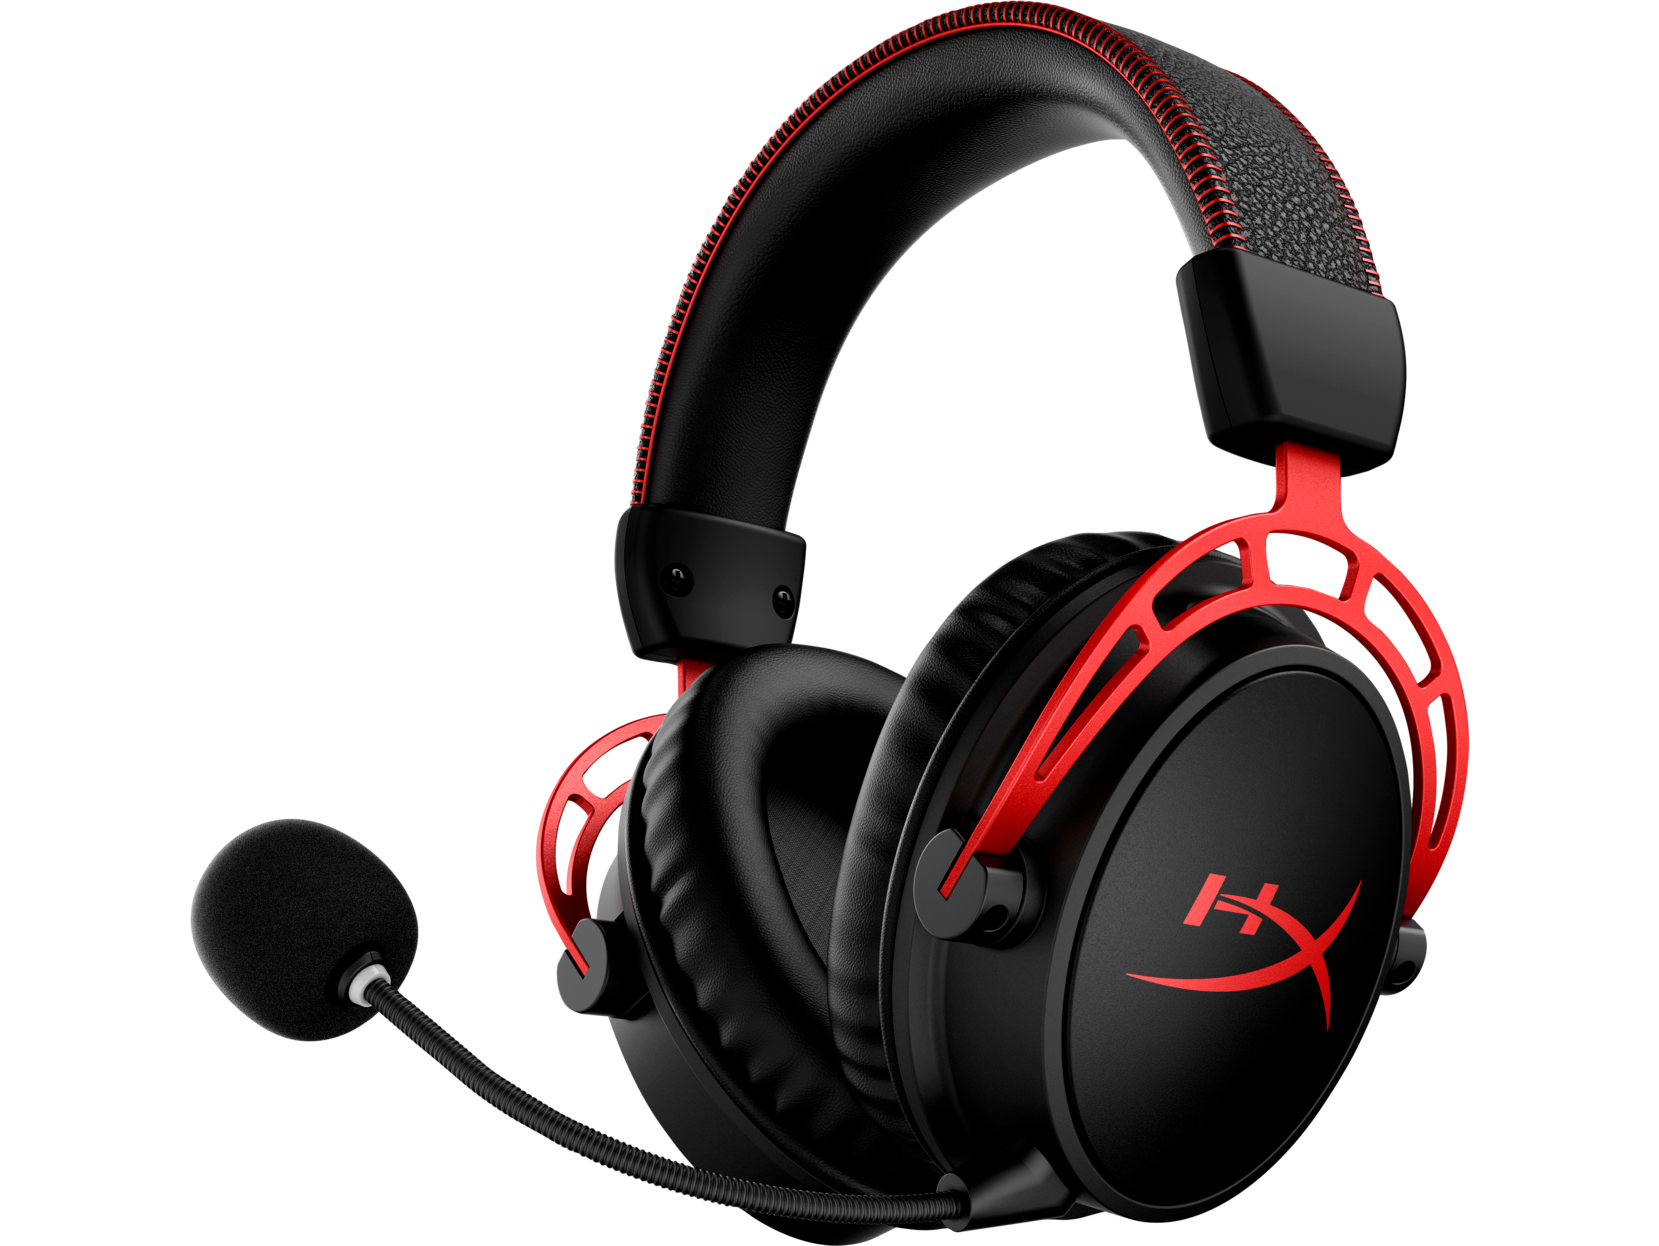 HyperX Cloud Alpha Wireless Over-Ear Gaming Headset, Red - image 5 of 7